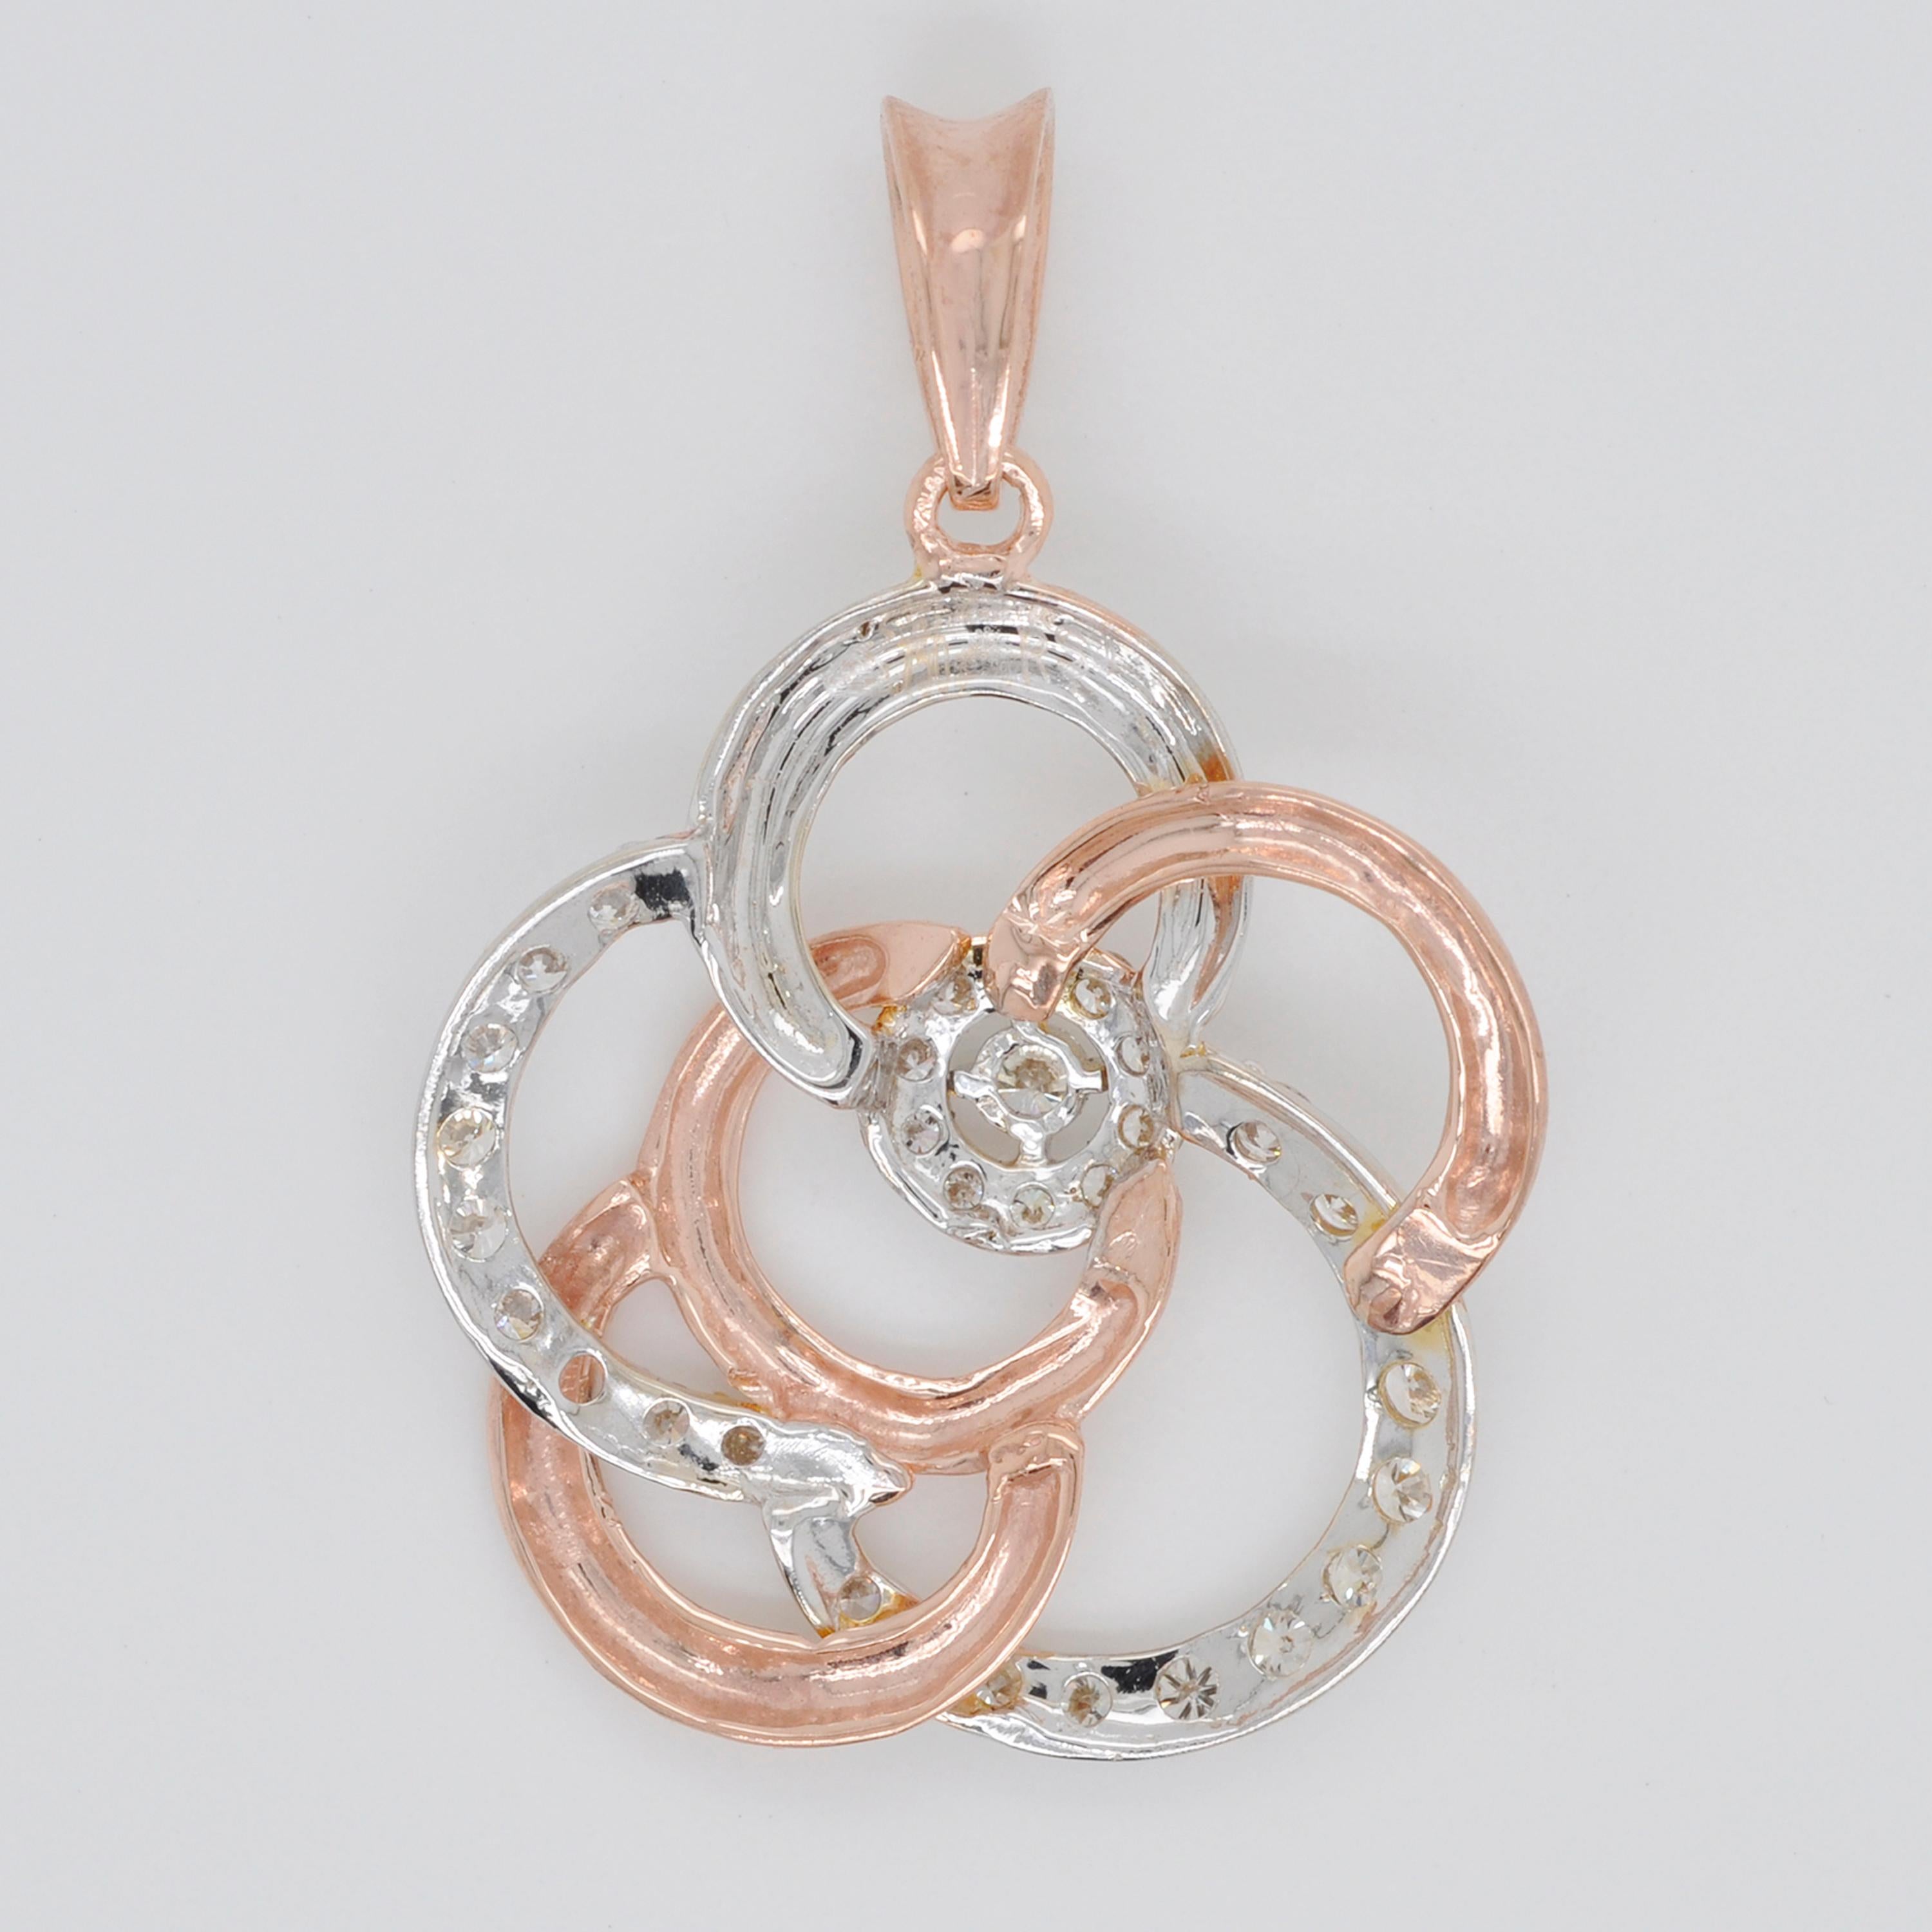 This beautiful 18 karat gold diamond pendant necklace is extremely elegant. Coupled with rose gold and white gold, the pendant is inspired by the shape of a rose. Wear it everyday, this piece of jewel is never a bore. 

Details:
Gold wt: 3.084 g
Dia